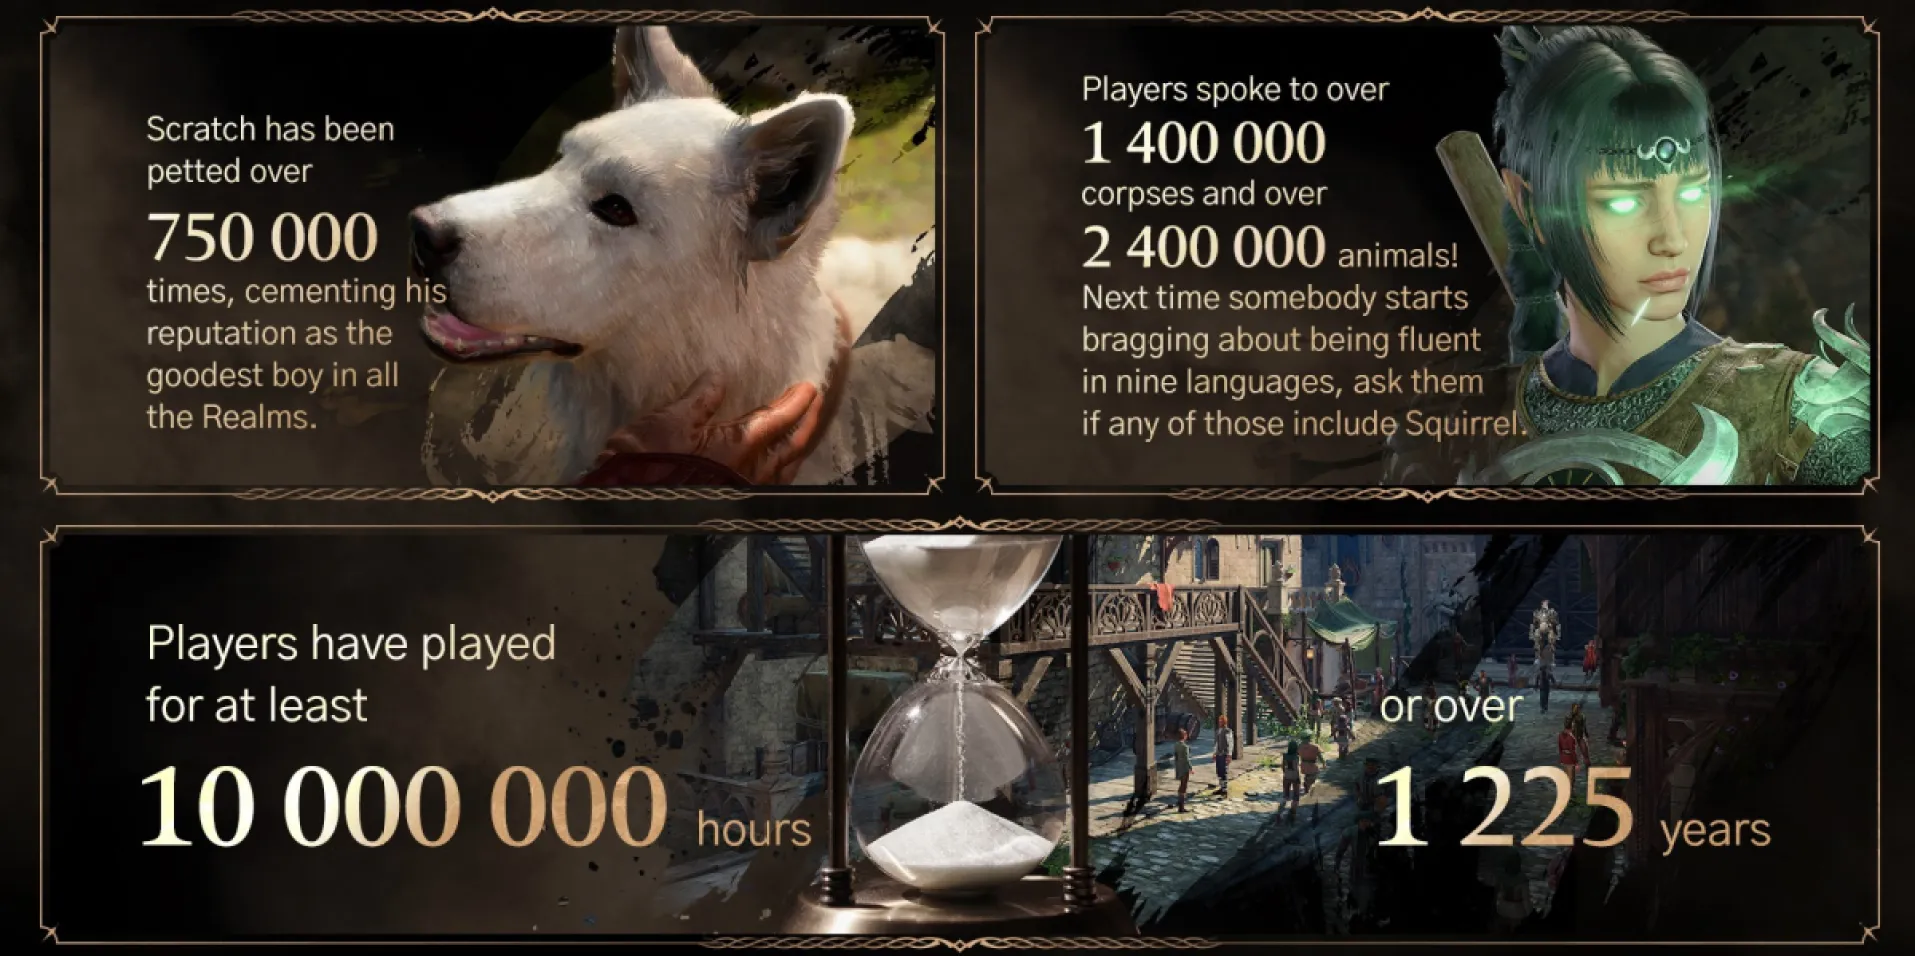 Nearly half of Baldur's Gate III players pet the dog, and millions of hours have already been played of the game.